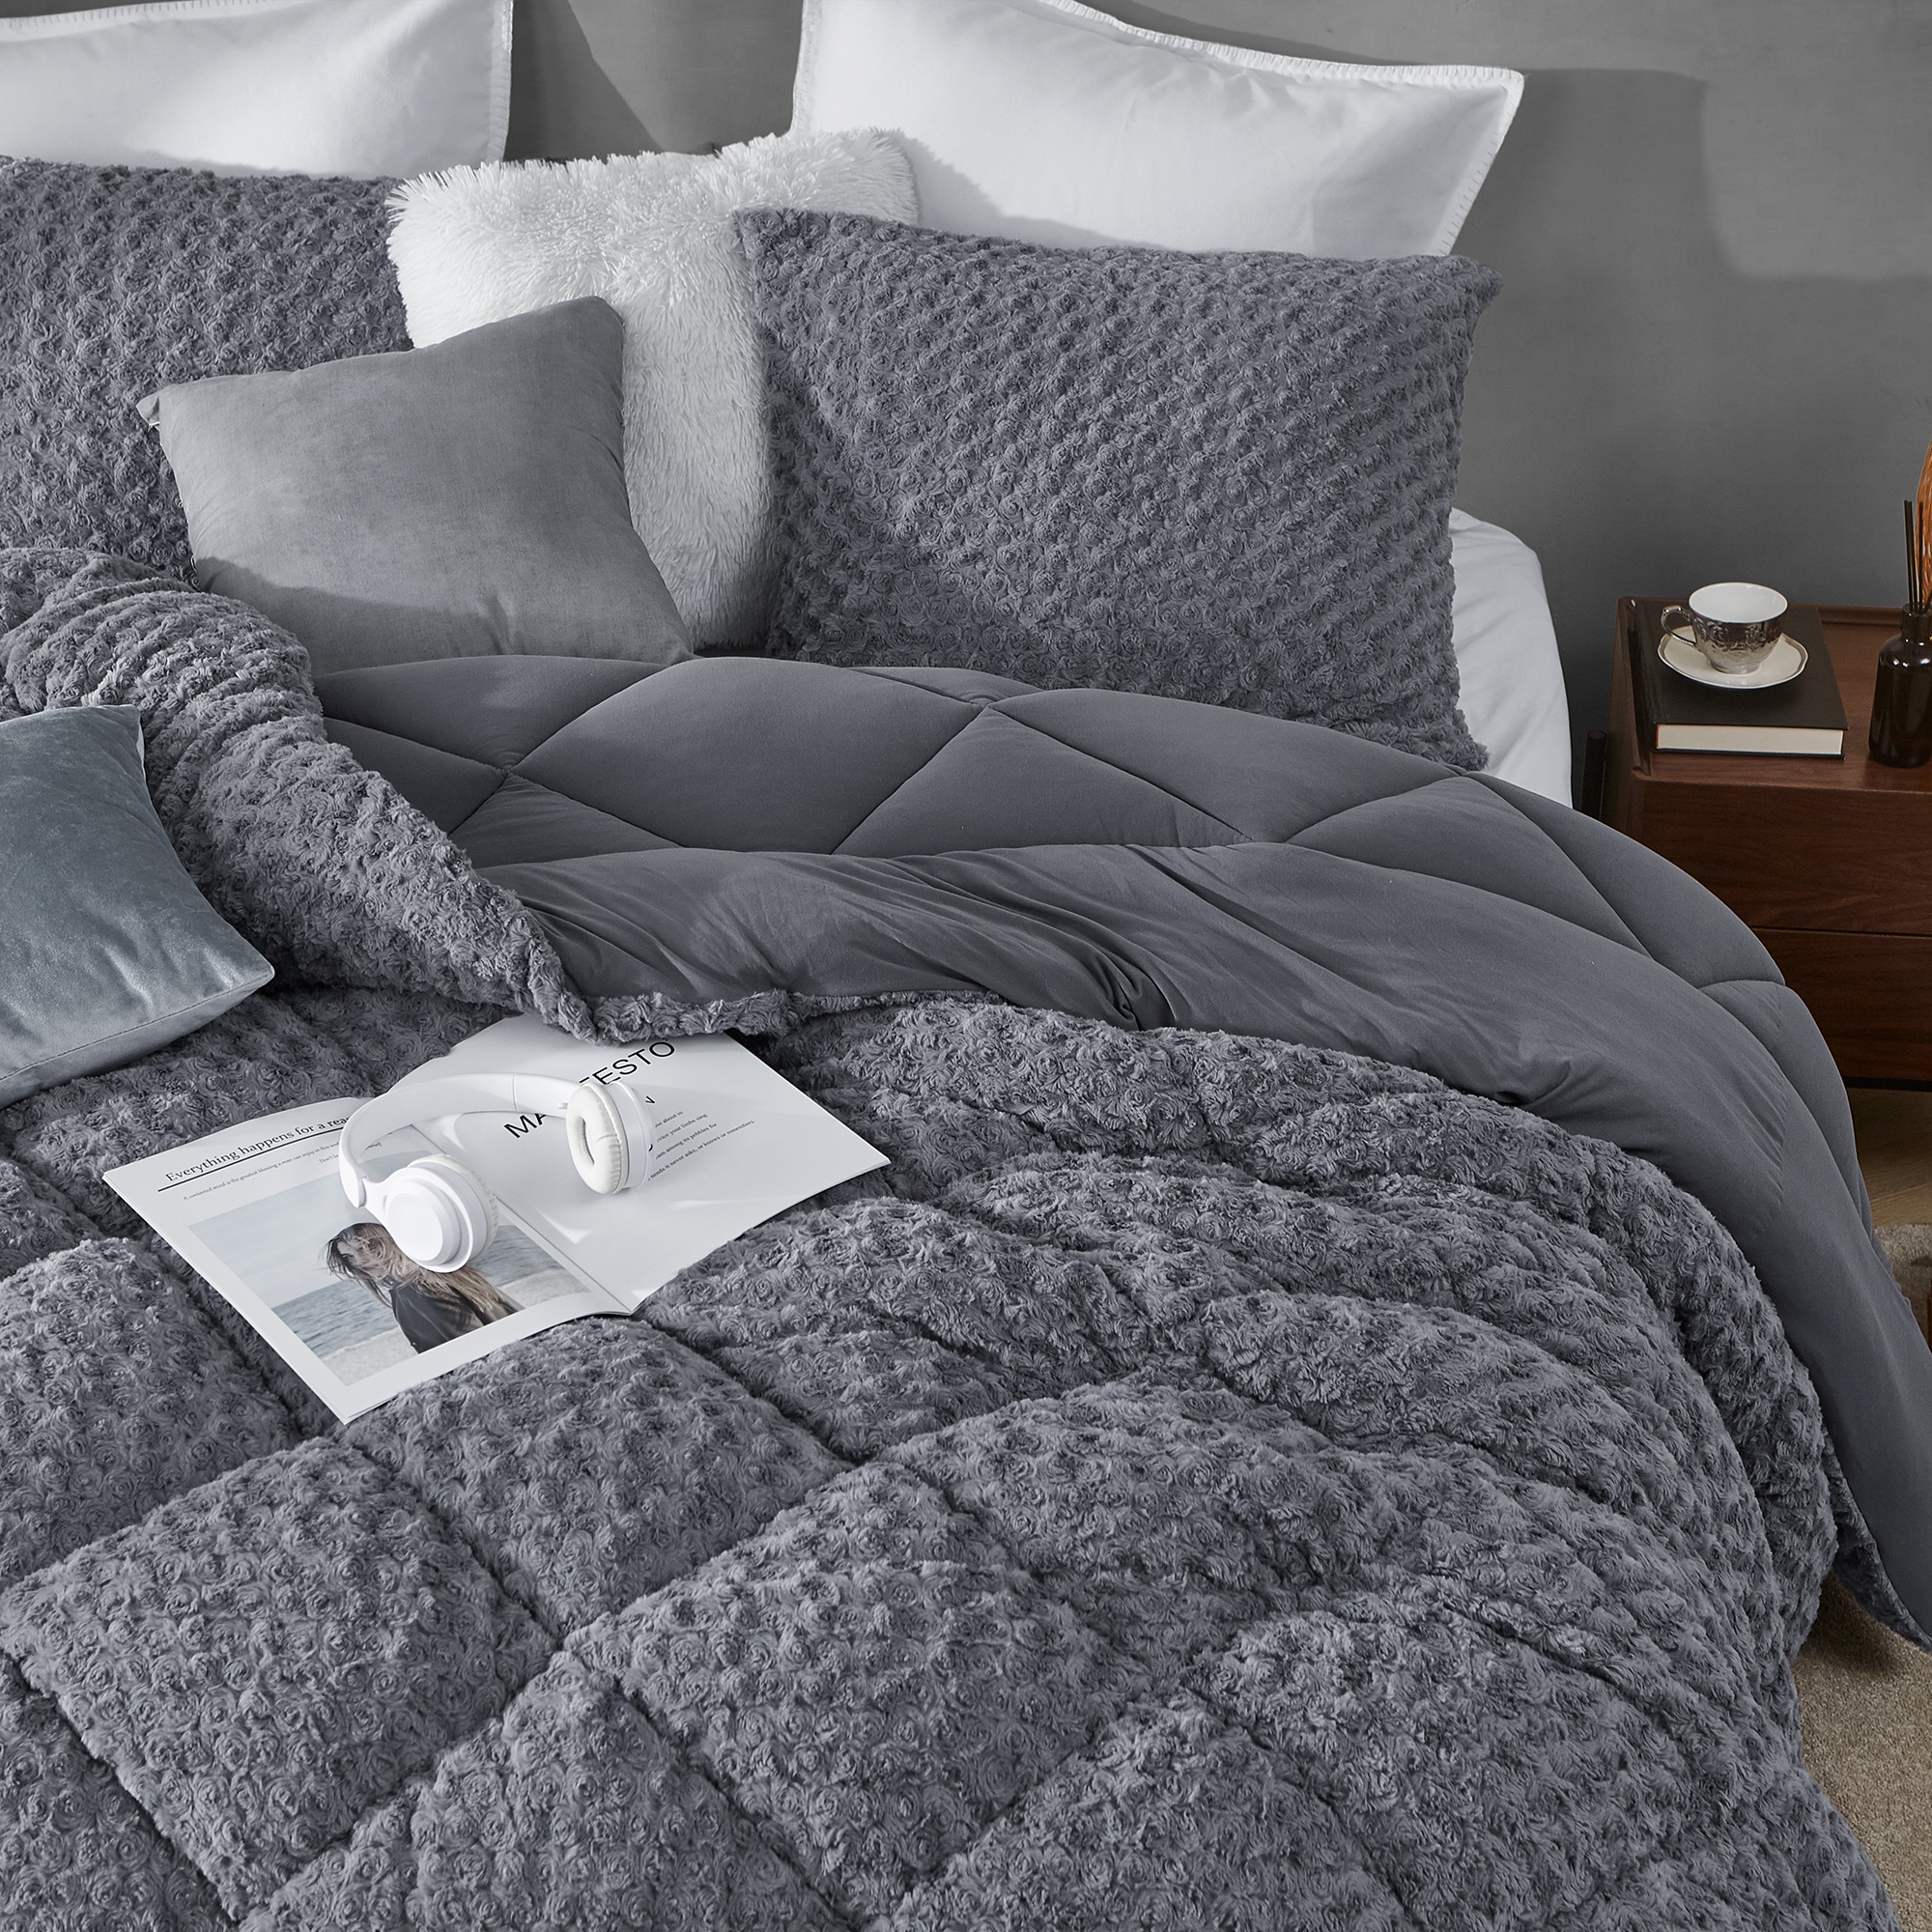 Puppy Love - Coma Inducer Oversized Comforter - Pedigree Silver